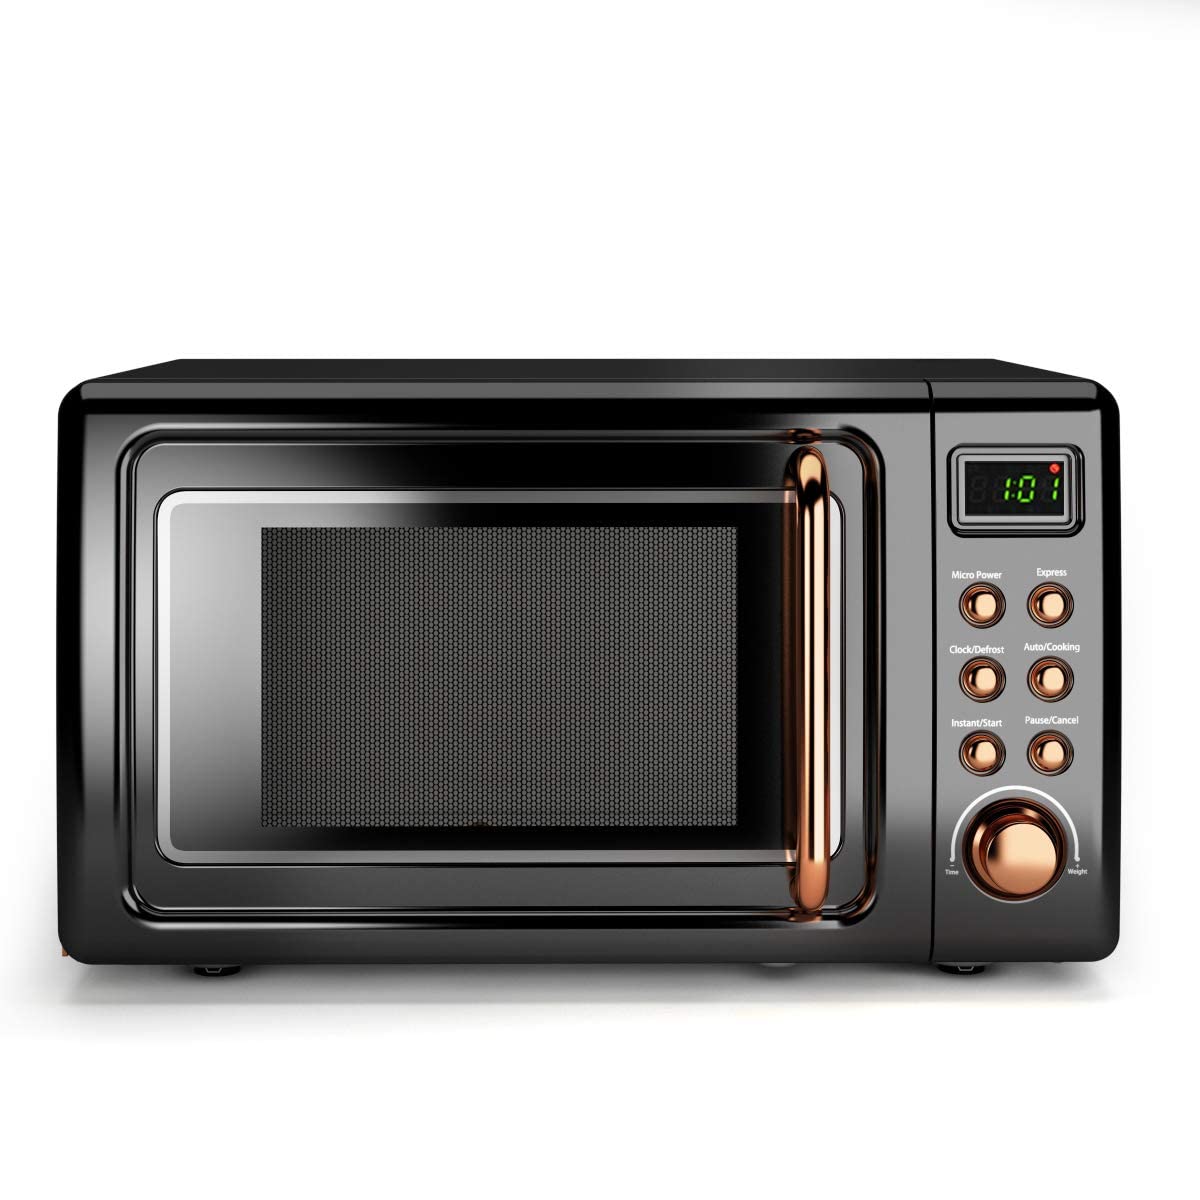 Nightcore Retro countertop Microwave Oven, Large 07cuft, 700-Watt, cold Rolled Steel countertop with Time Setting, glass Turntable Plate,